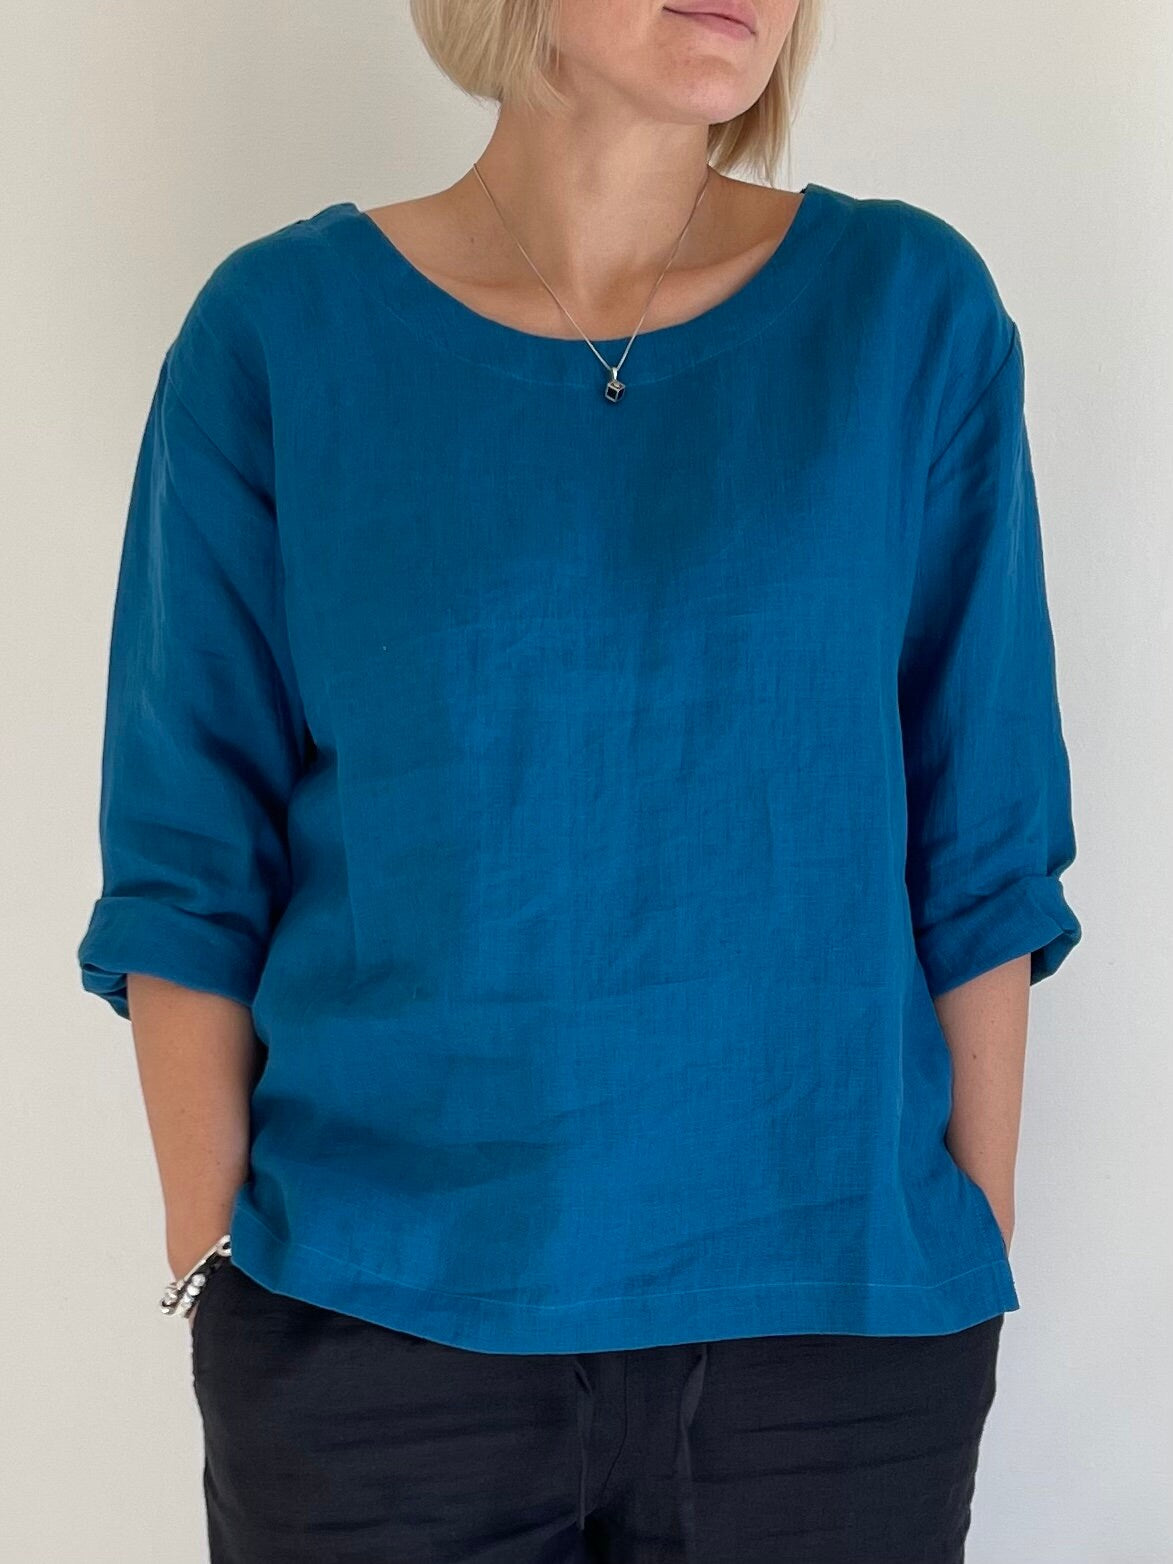 Premium quality linen top, pre-washed and non-shrinking.